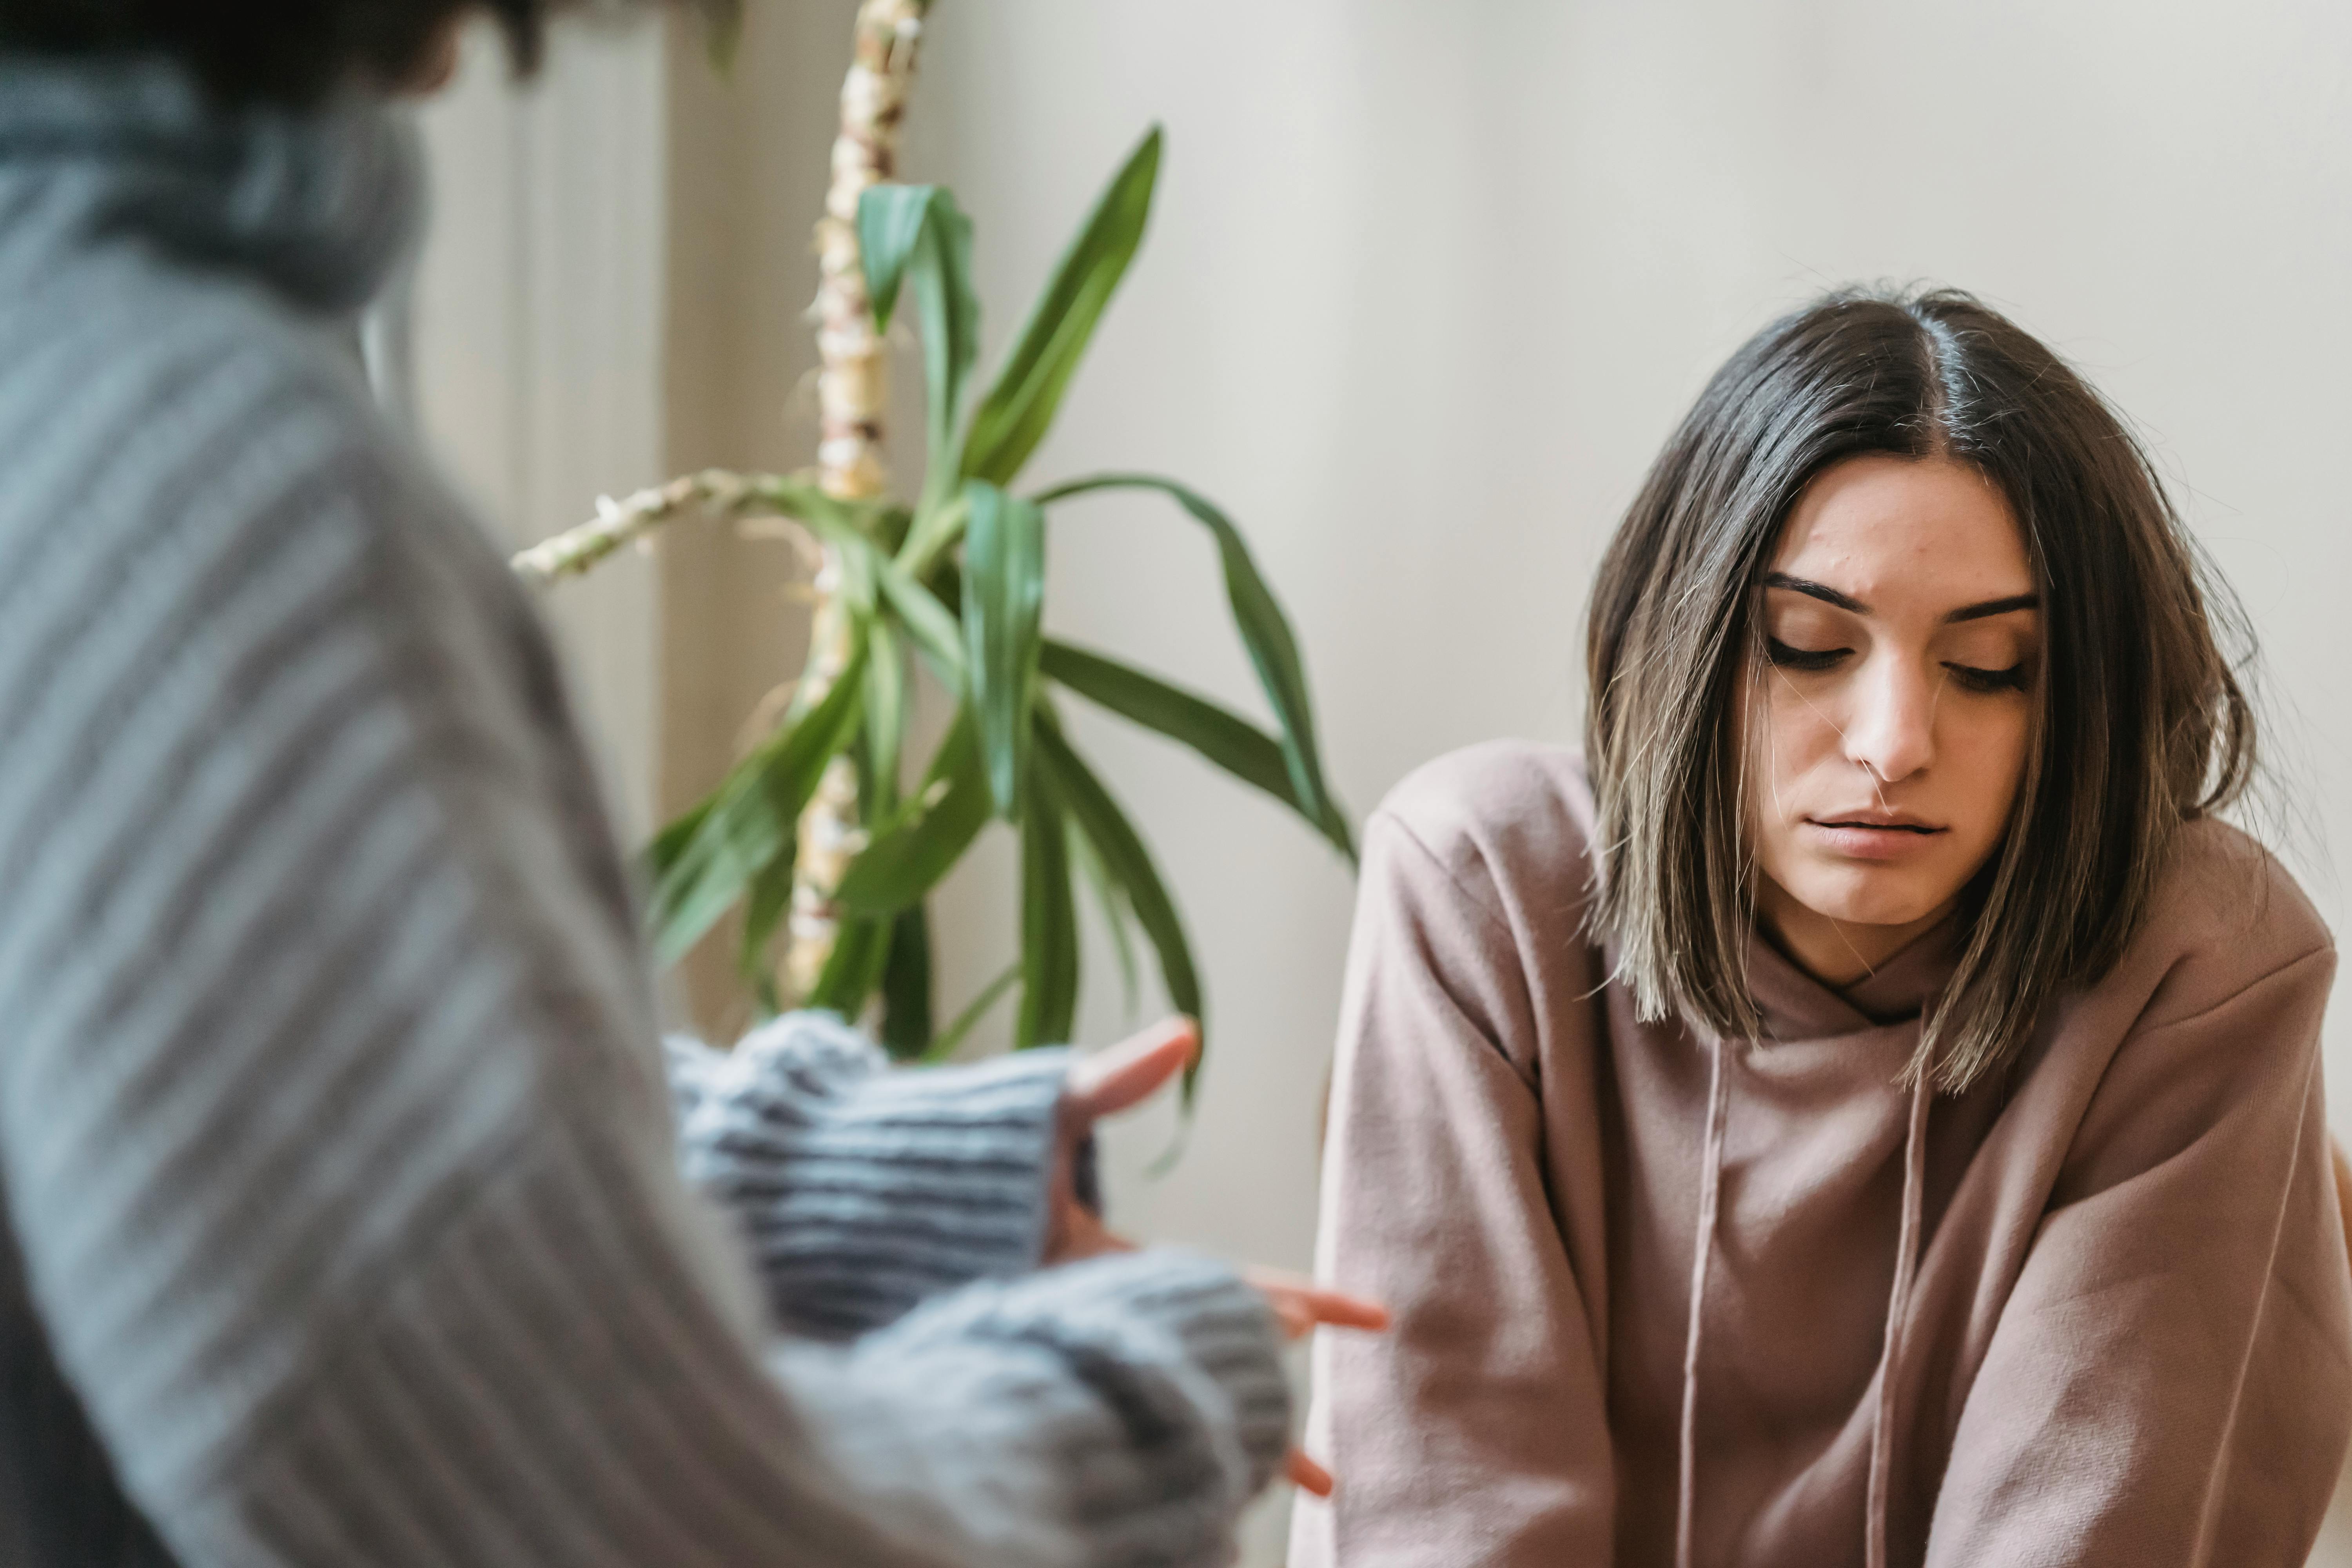 An upset woman listening to someone talk | Source: Pexels